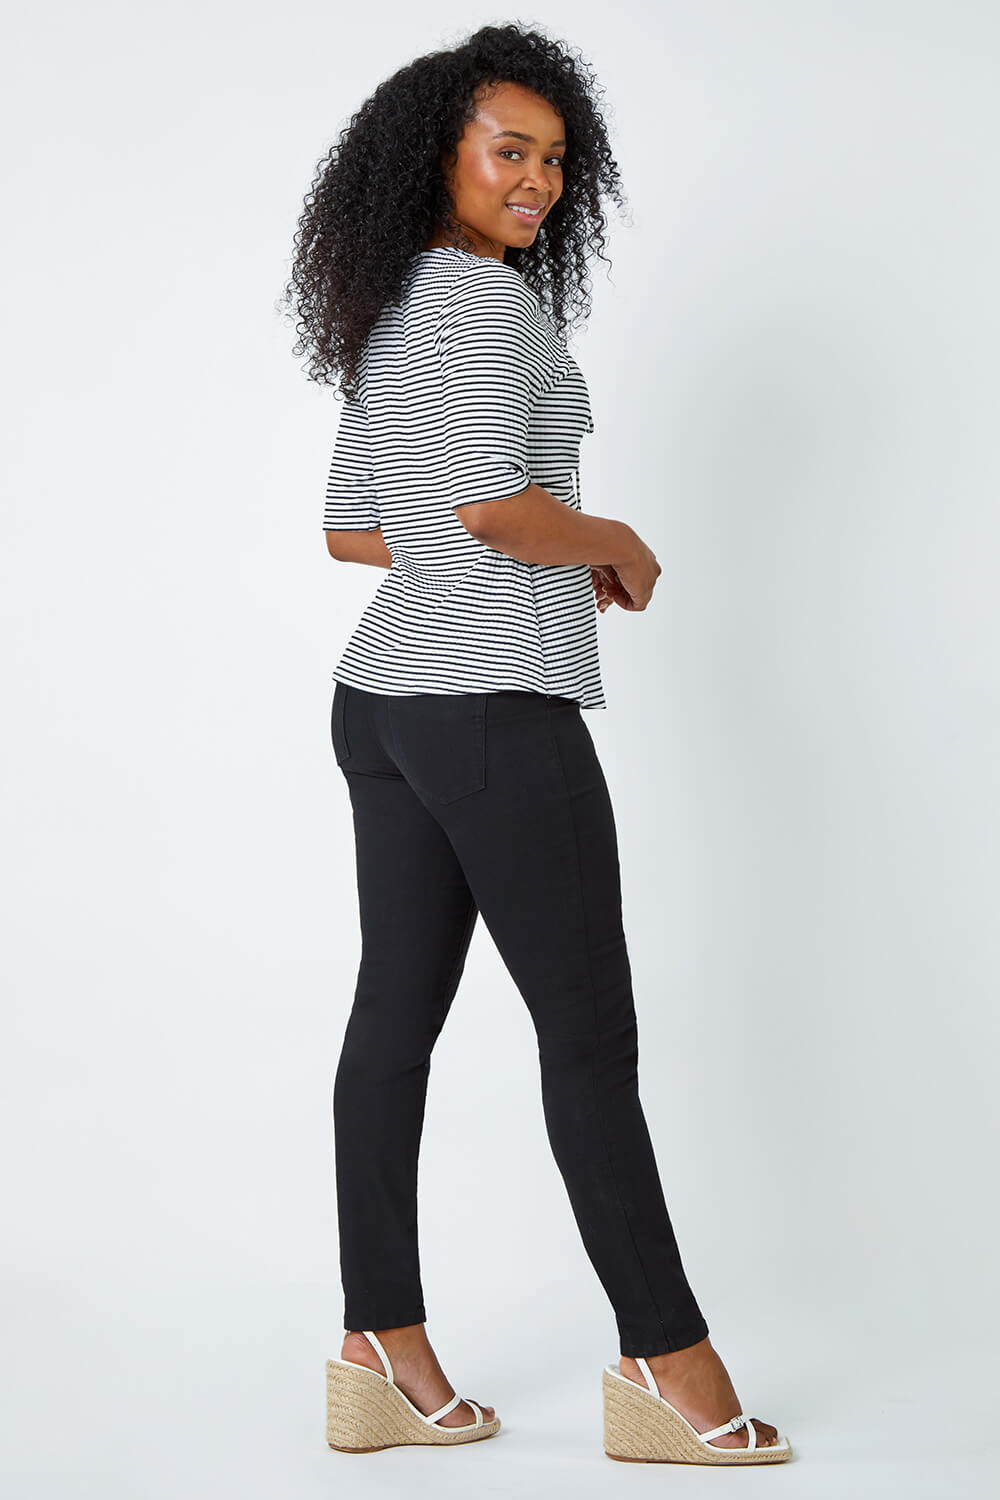 Black Petite Stripe Ruched Stretch Top, Image 3 of 5